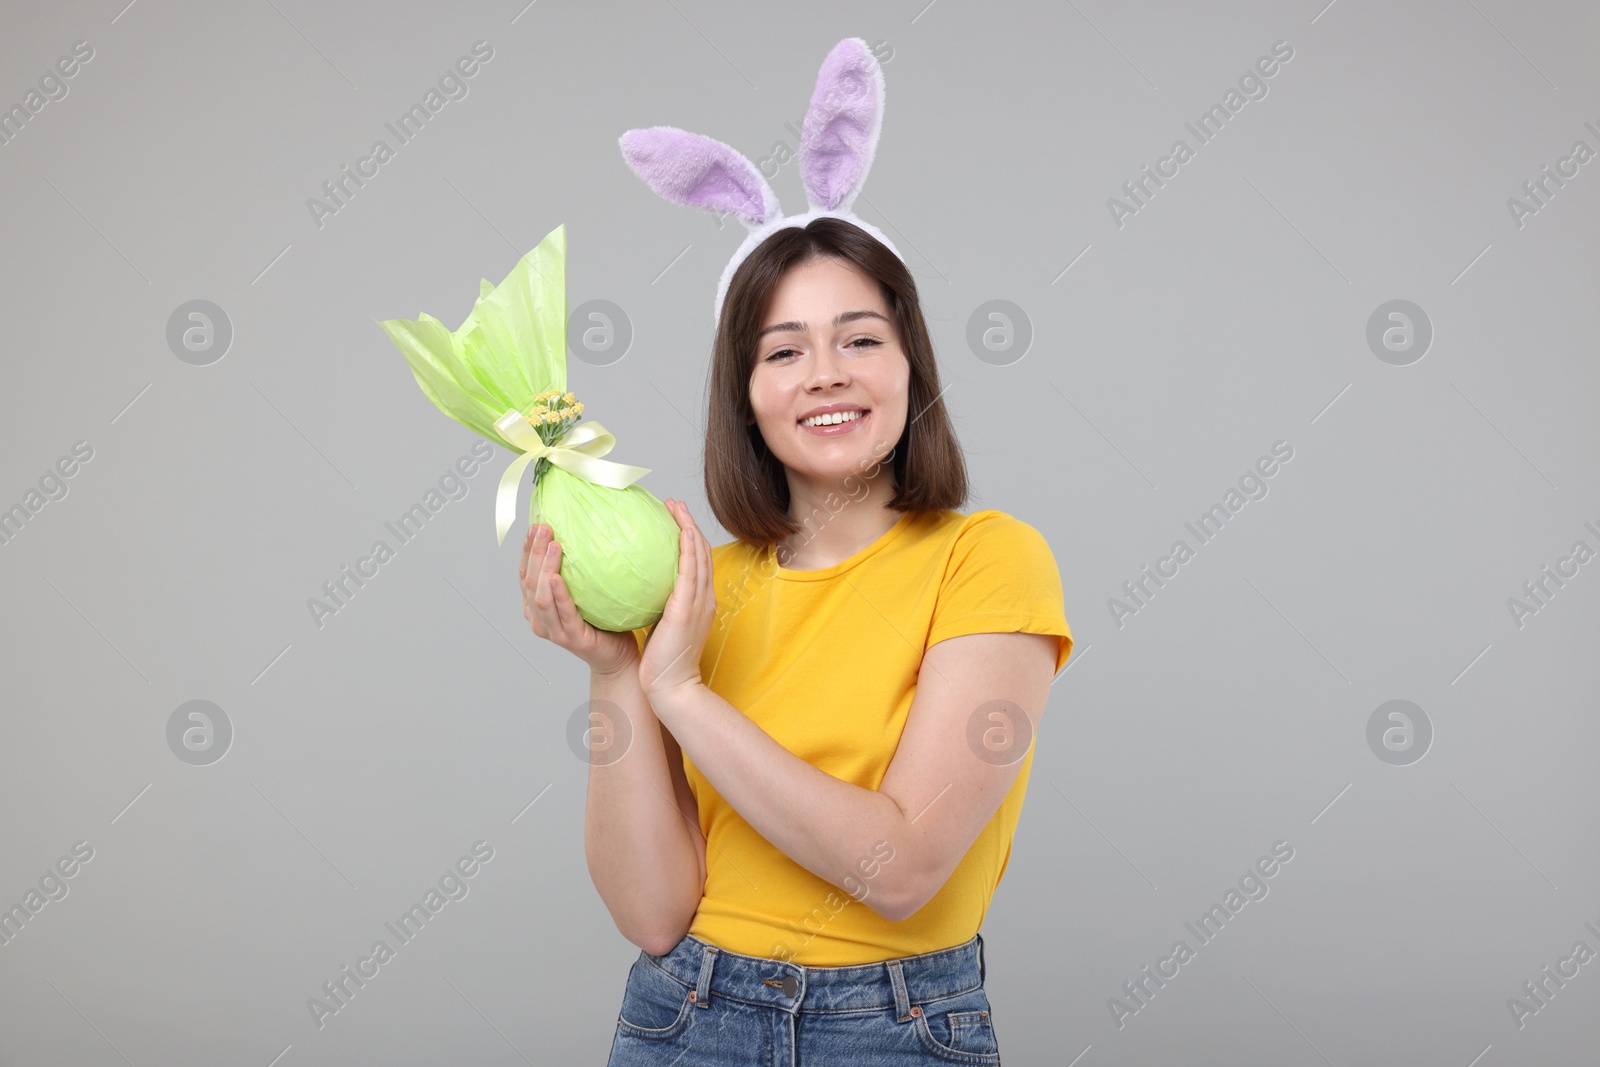 Photo of Easter celebration. Happy woman with bunny ears and wrapped egg on grey background